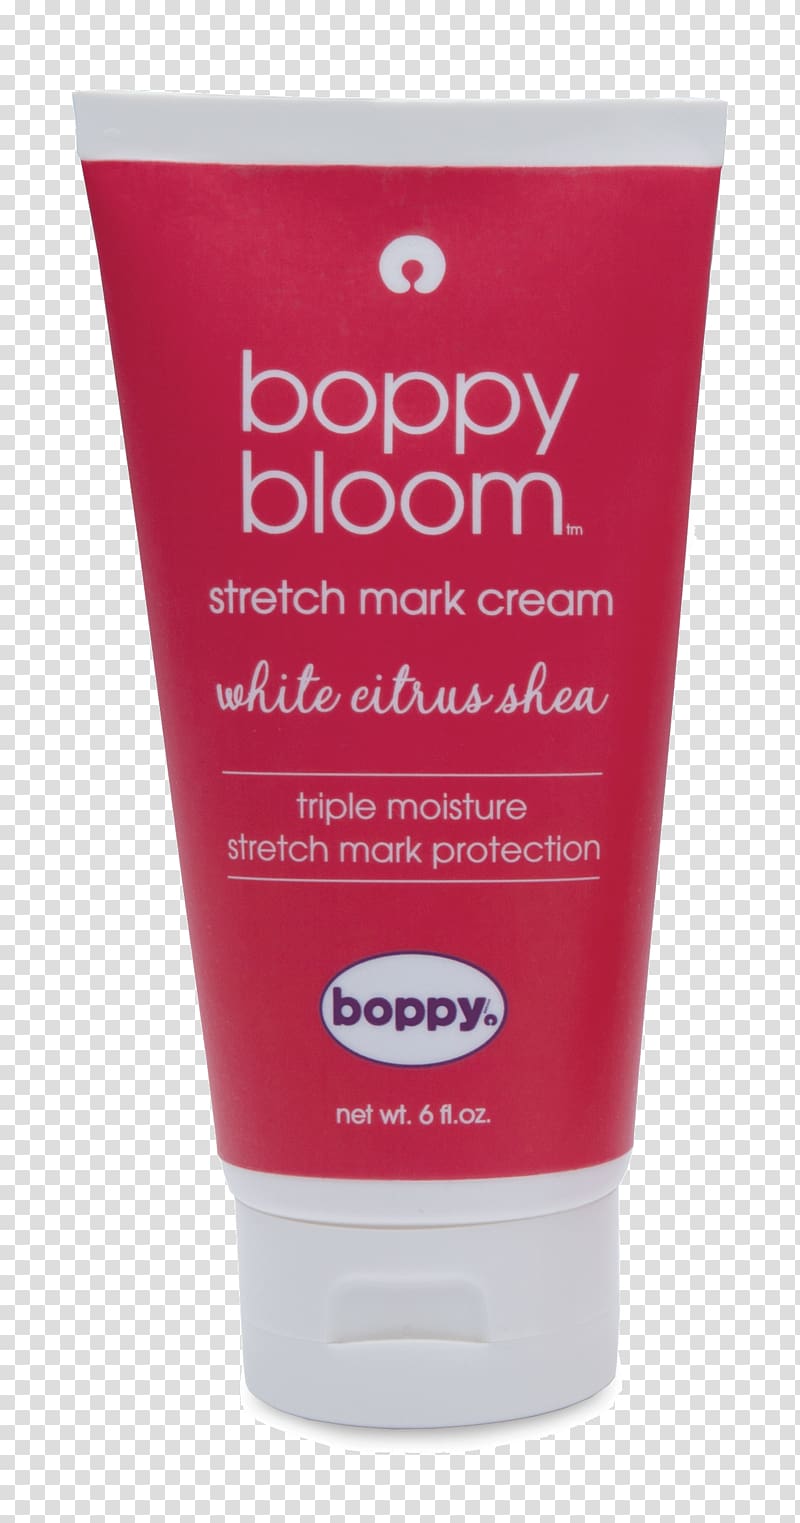 Boppy Bloom Stretch Mark Cream Lotion Stretch marks Lip balm, others transparent background PNG clipart